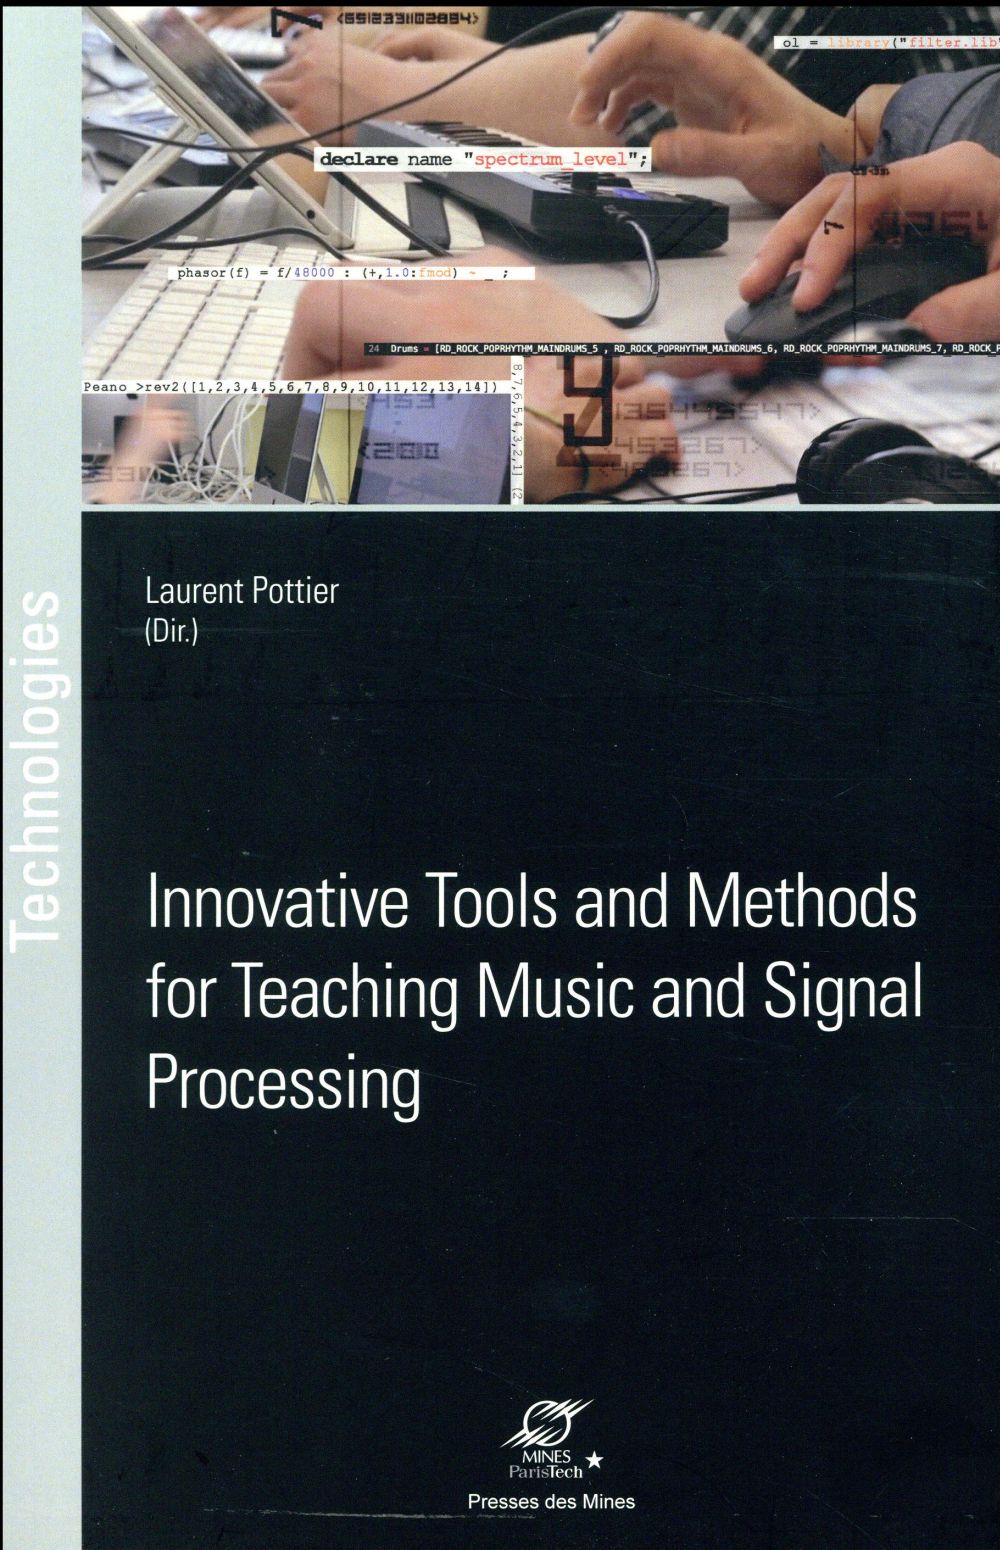 INNOVATIVE TOOLS AND METHODS FOR TEACHING MUSIC AND SIGNAL PROCESSING